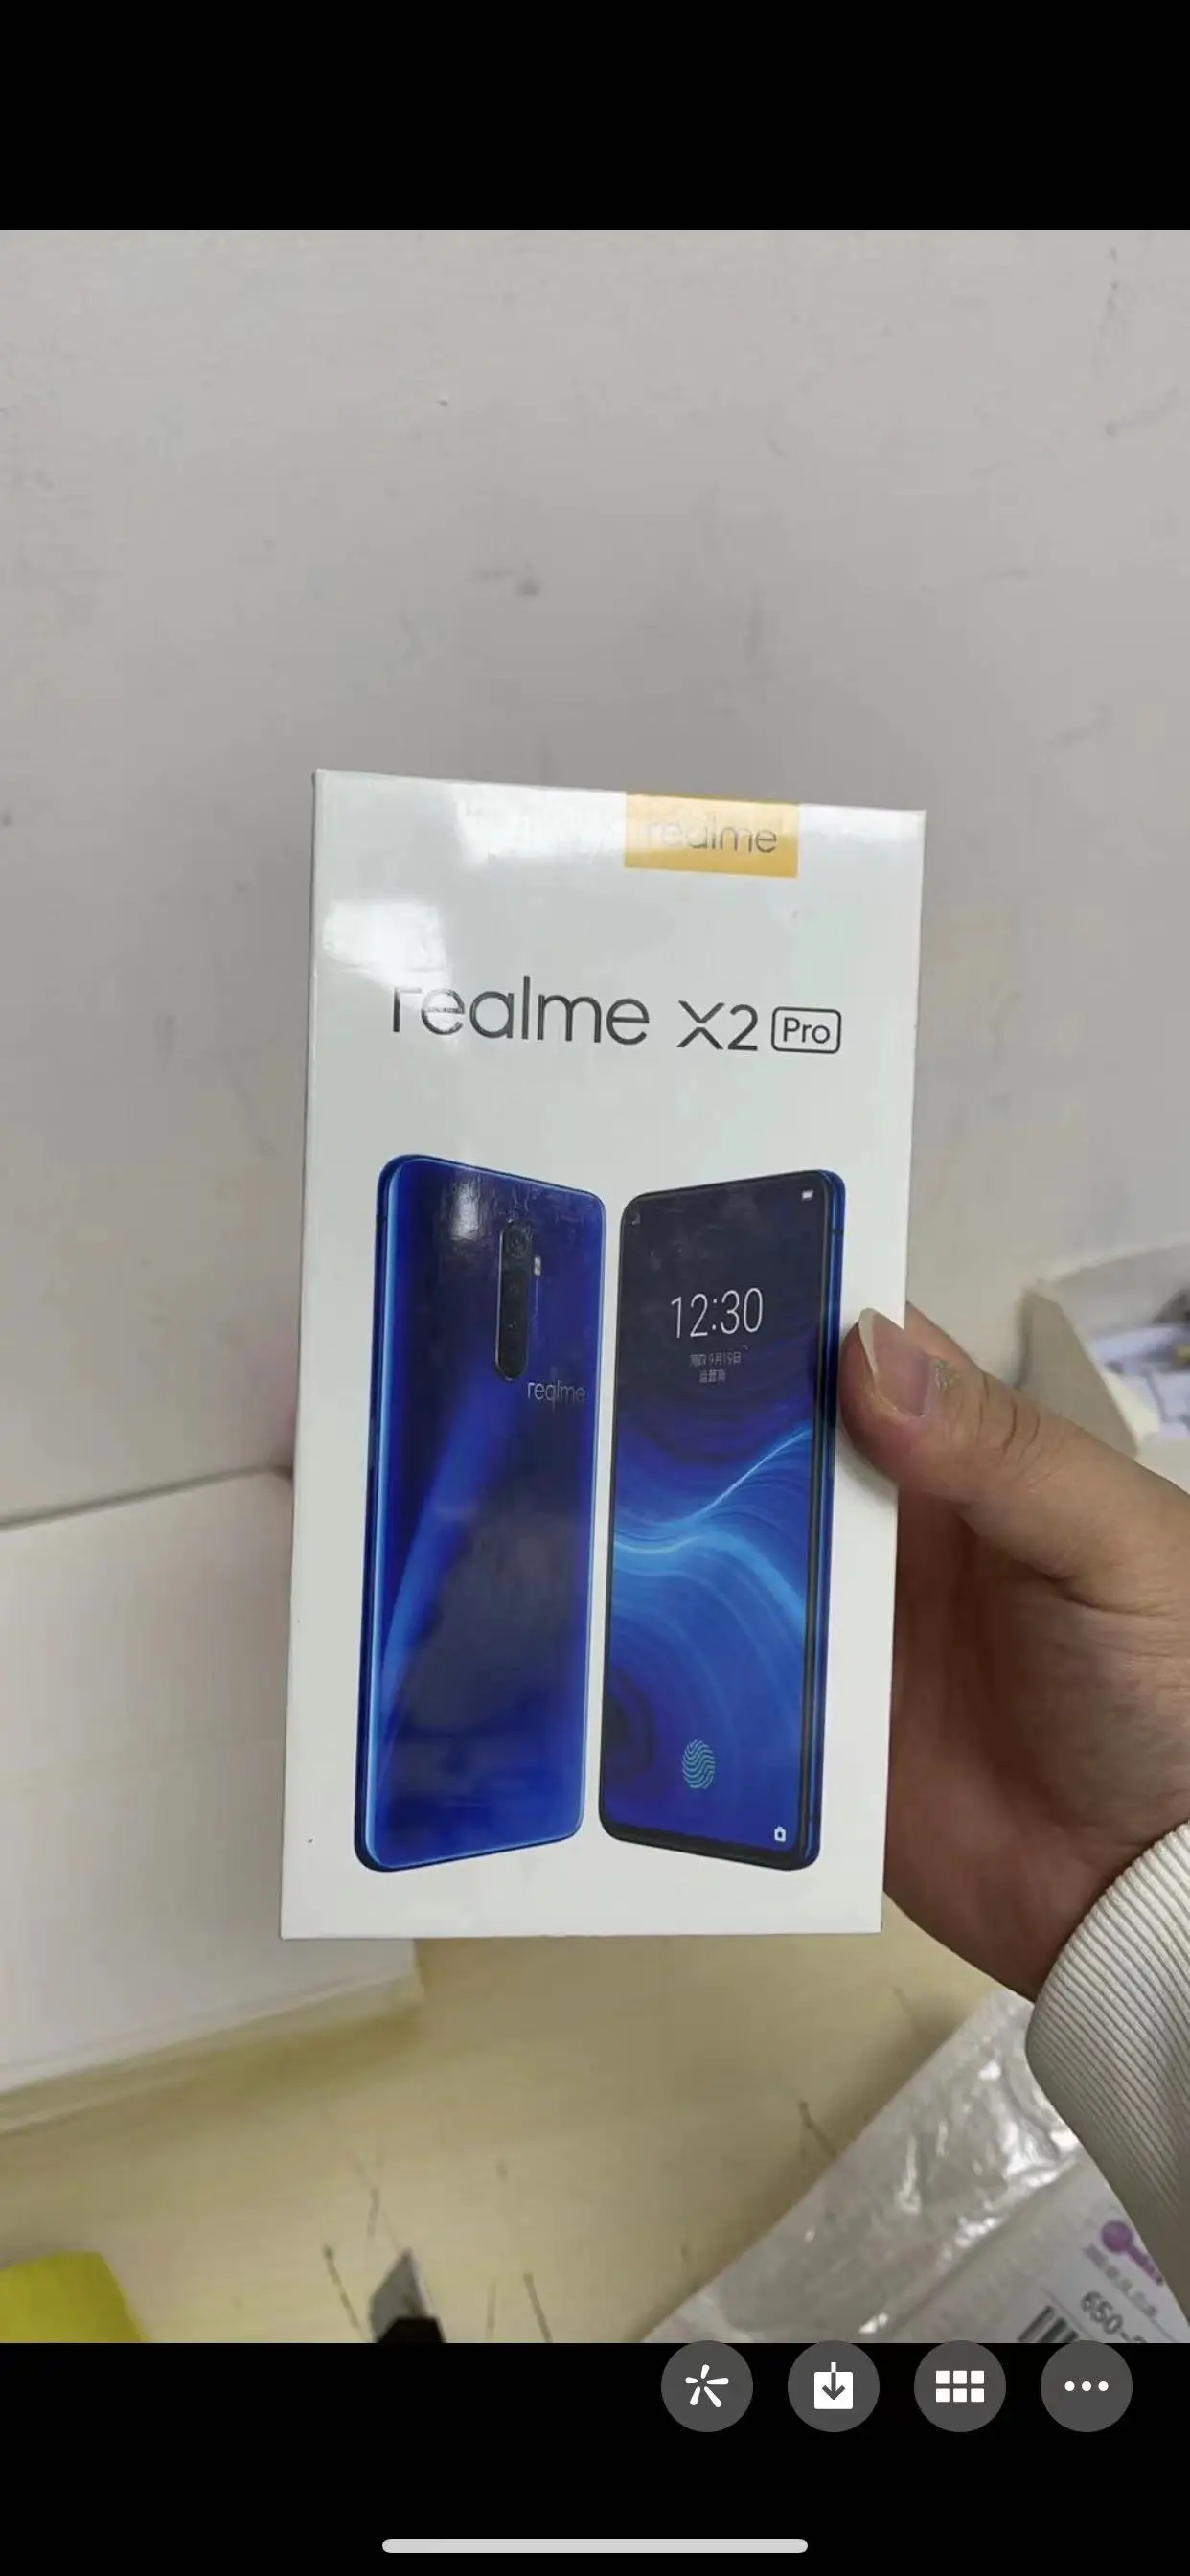 realme X2 Pro 8GB 256GB Android 6.5" Snapdragon 855 Plus Octa-core 64MP Camera 4000mAh 50W VOOC Fast Charge NFC laptop ram